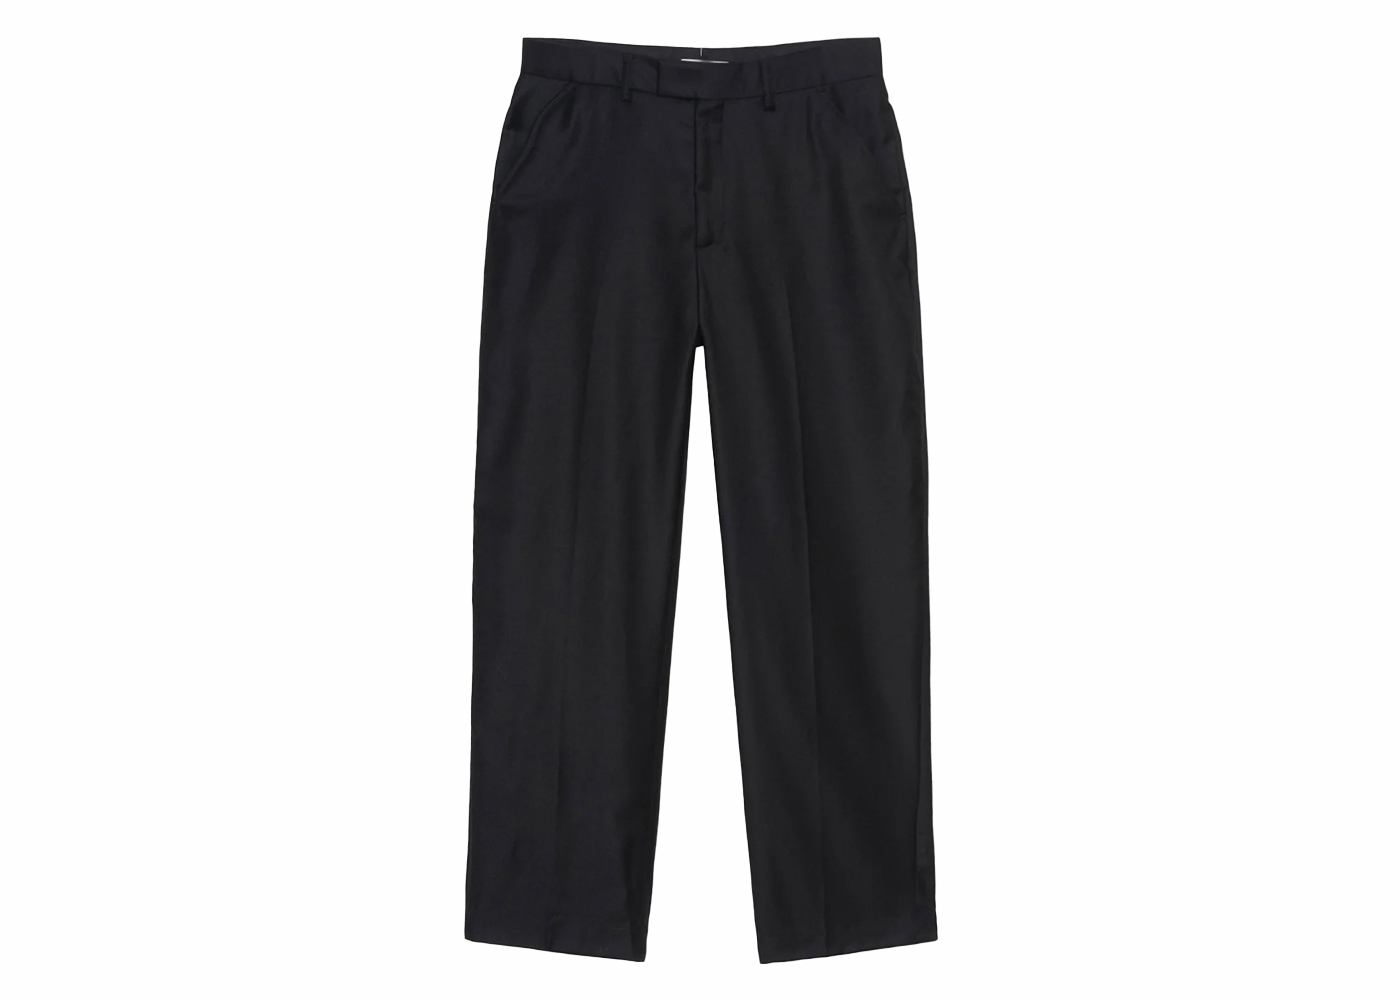 Stussy x Our Legacy Wool Chino Pant Shadow Grey